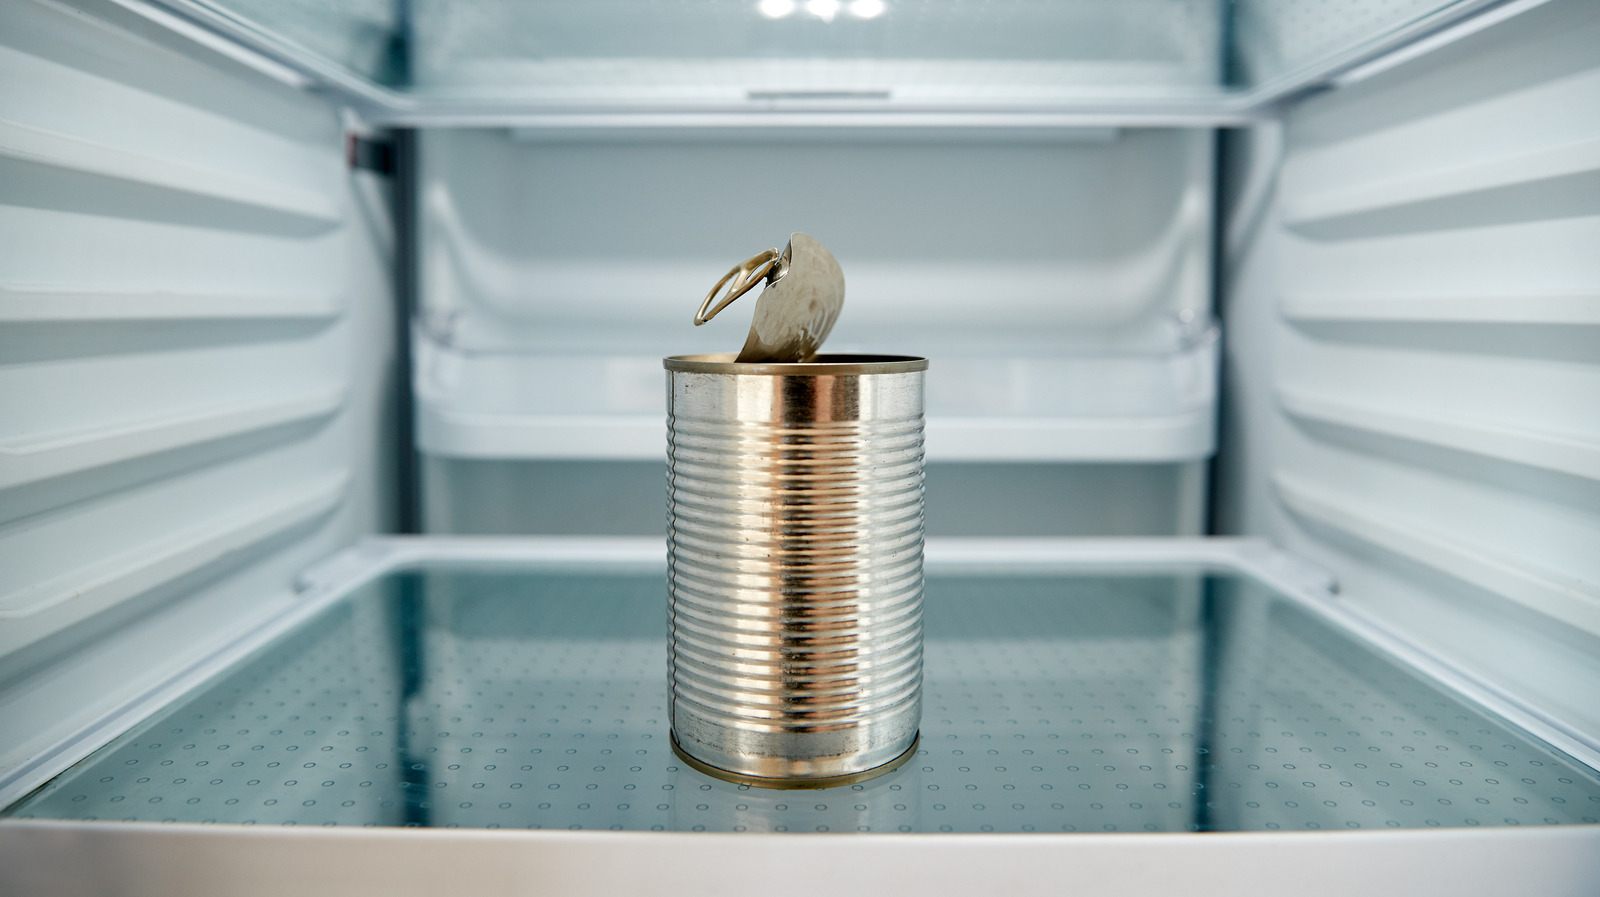 https://www.thedailymeal.com/img/gallery/is-it-safe-to-store-open-canned-food-in-the-refrigerator/l-intro-1695134593.jpg